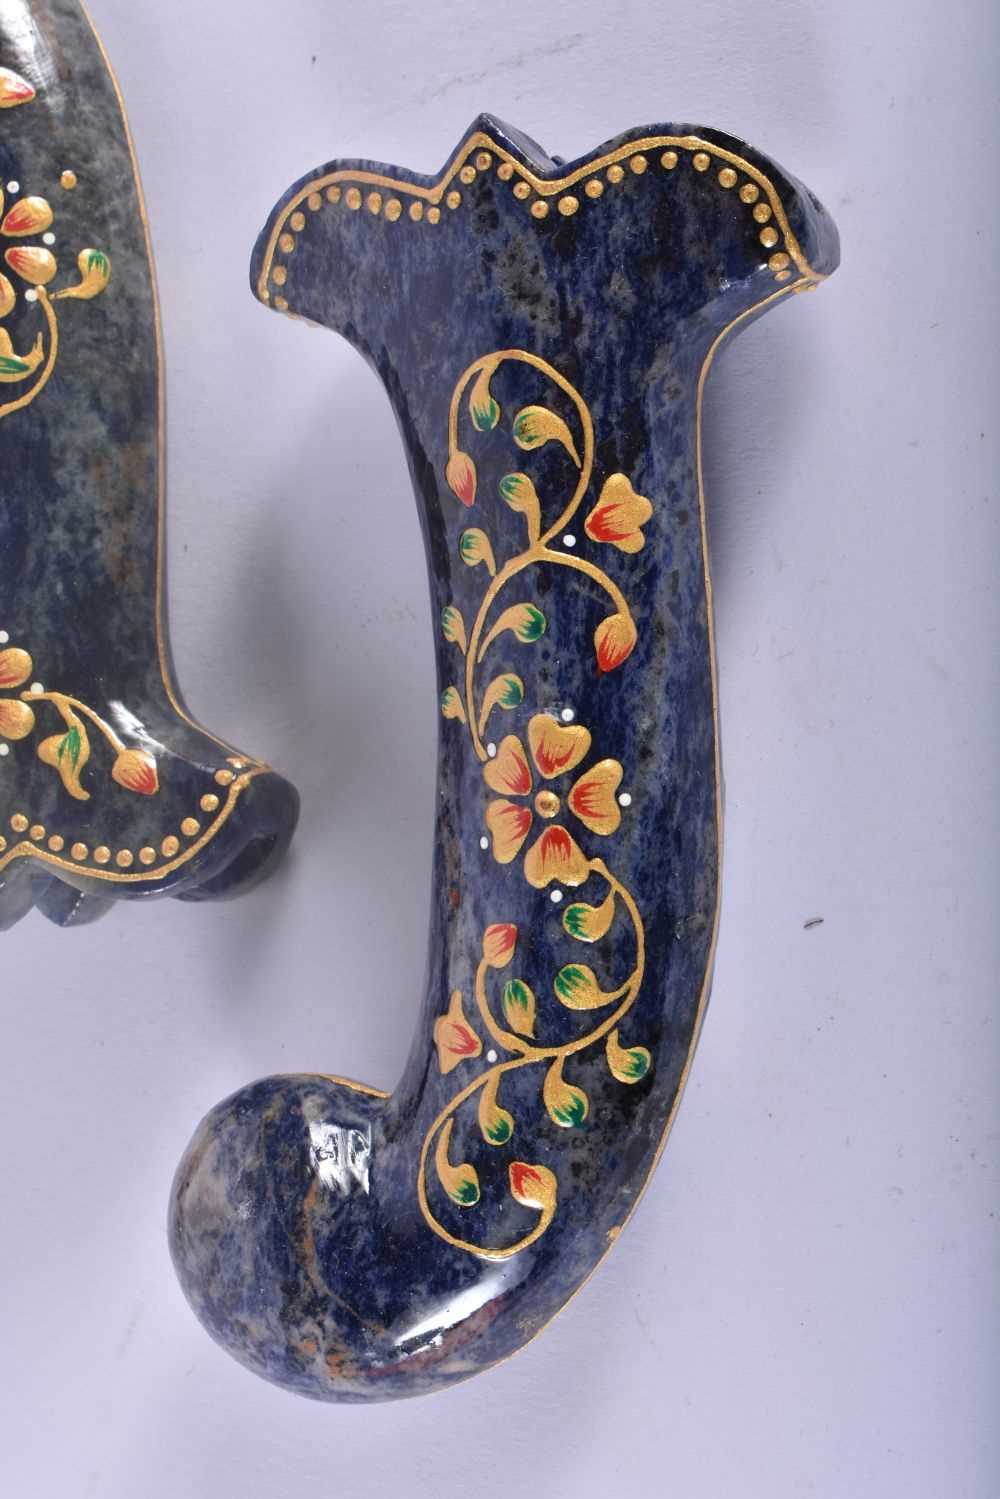 A SET OF FIVE MIDDLE EASTERN QAJAR LACQUER HARDSTONE DAGGER HANDLES overlaid with foliage and vines. - Image 2 of 4